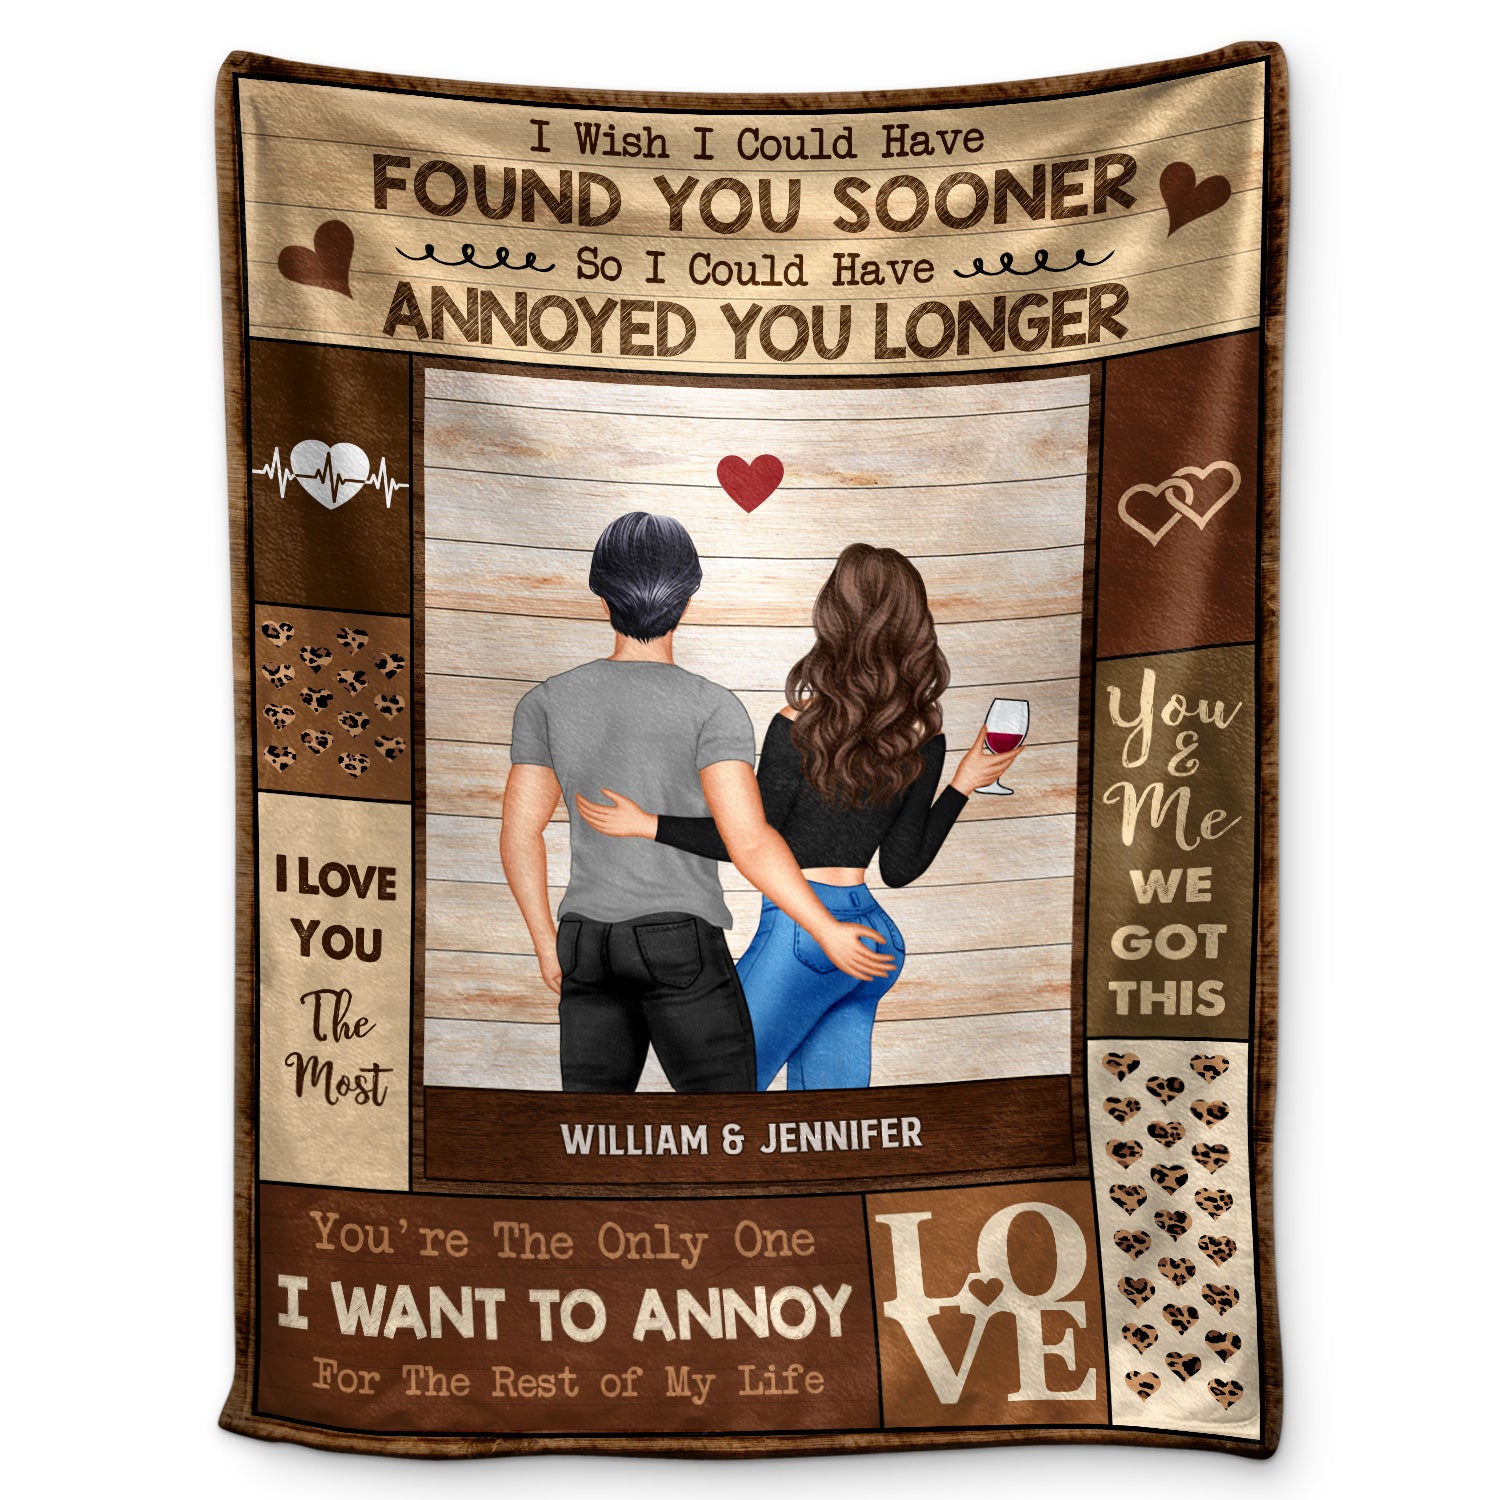 Couple I Wish I Could Found You Sooner - Gift For Couples - Personalized Custom Fleece Blanket